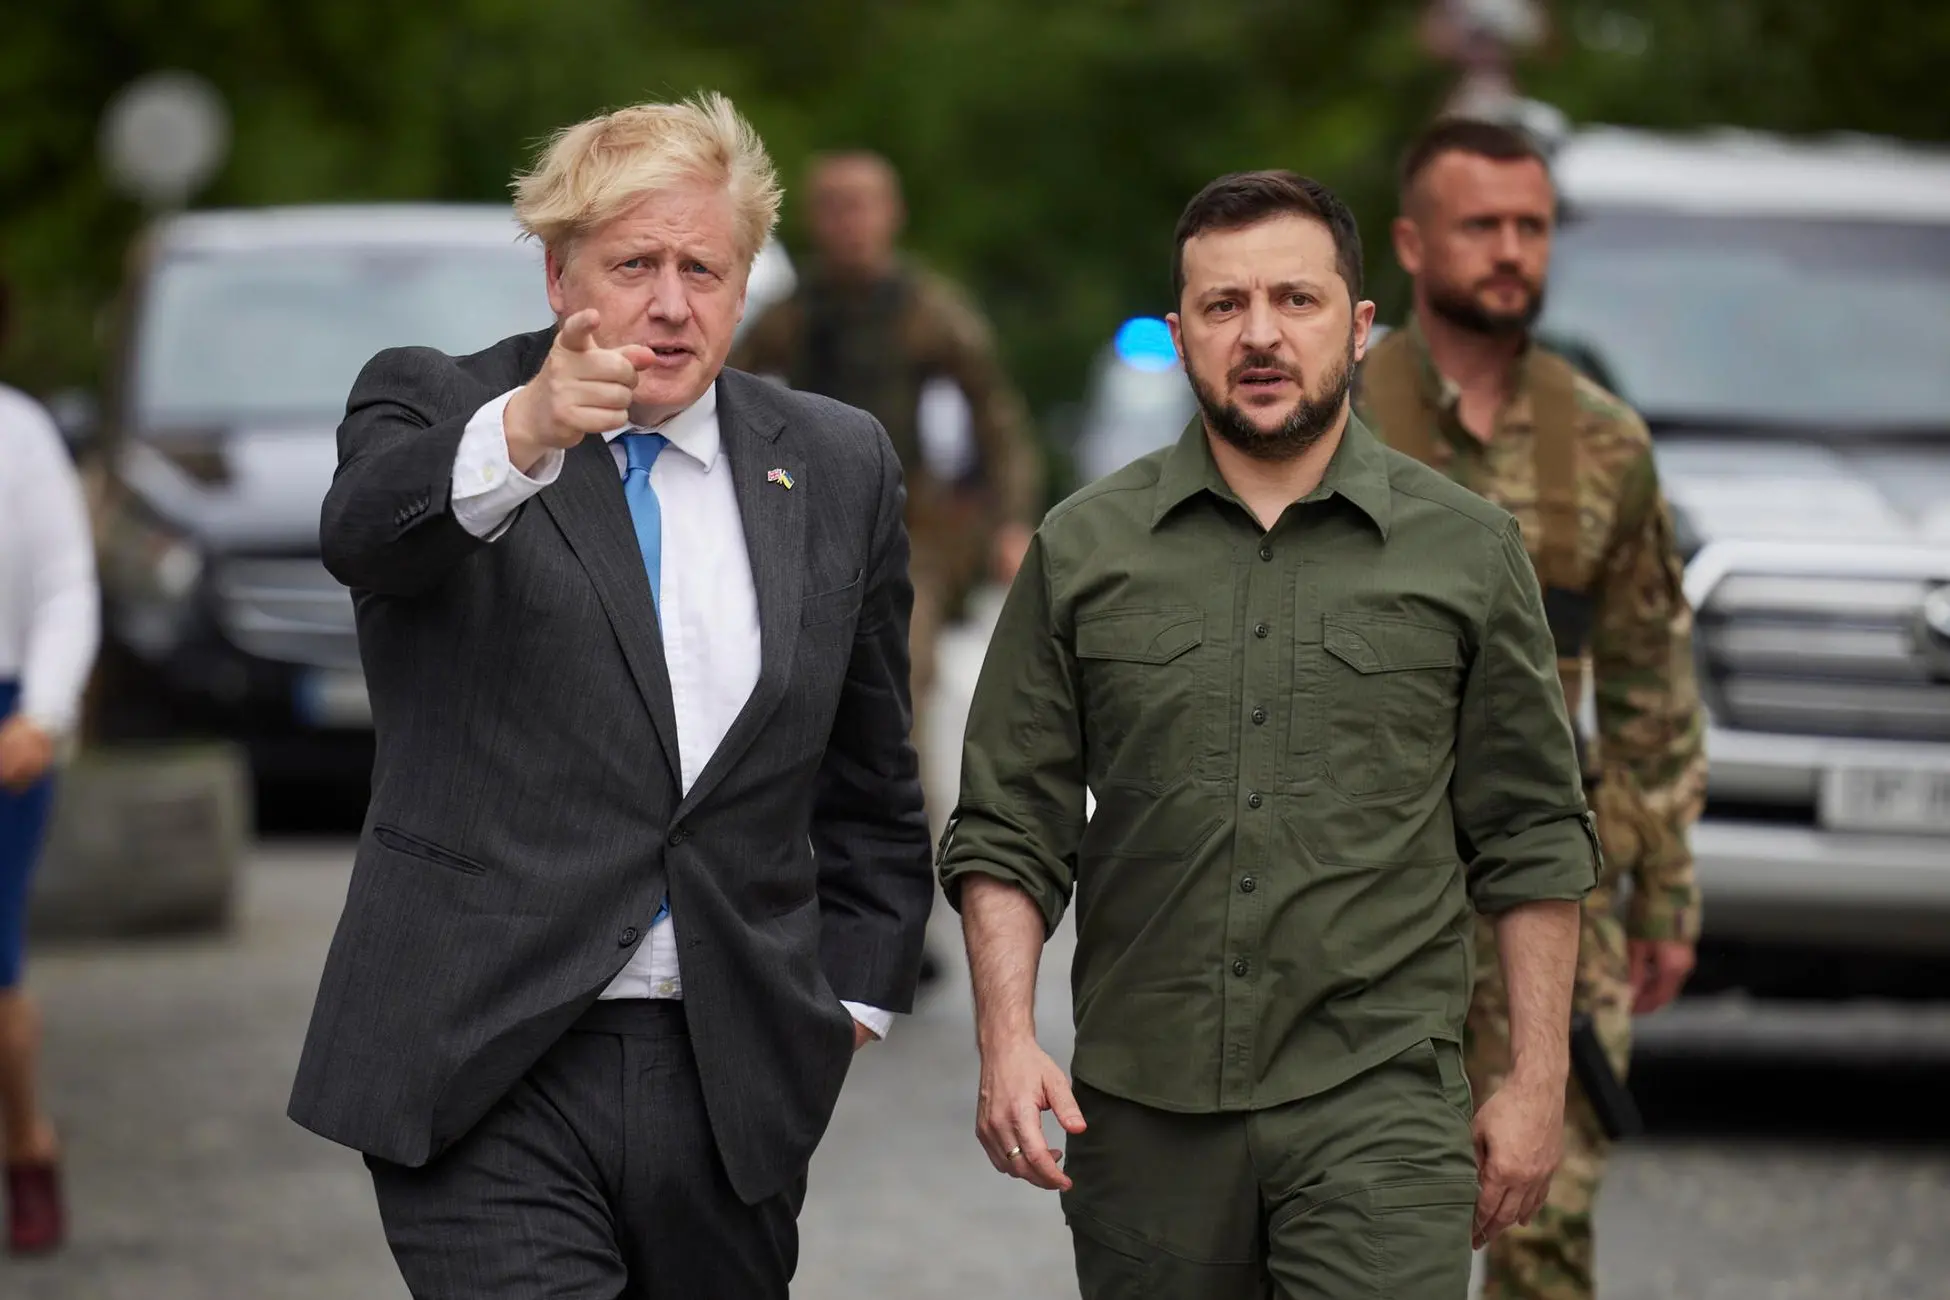 epa10019071 A handout photo made available by the Ukrainian Presidential Press Service shows Ukrainian President Volodymyr Zelensky (R) and British Prime Minister Boris Johnson (L) walking on the square near St. Mikhailovsky Cathedral in Kyiv (Kiev), Ukraine, 17 June 2022. During his visit to Kyiv, Johnson offered to launch a major training operation for Ukrainian forces. EPA/UKRAINIAN PRESIDENTIAL PRESS SERVICE HANDOUT MANDATORY CREDIT: UKRAINIAN PRESIDENTIAL PRESS SERVICE HANDOUT EDITORIAL USE ONLY/NO SALES